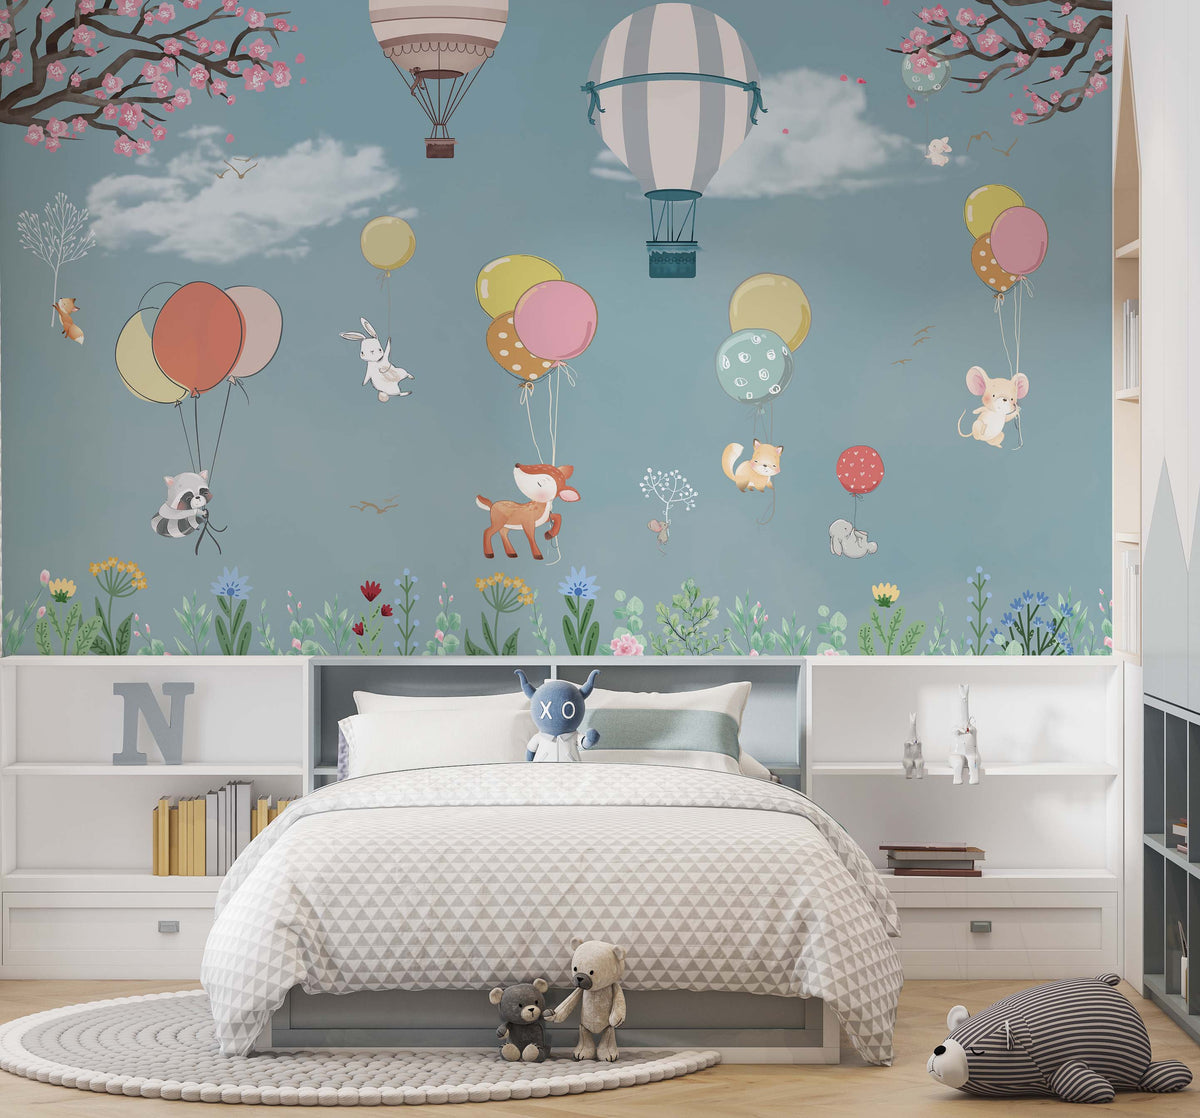 Fly with Balloons Wallpaper Mural - Colorful Wall Decor-ChandeliersDecor